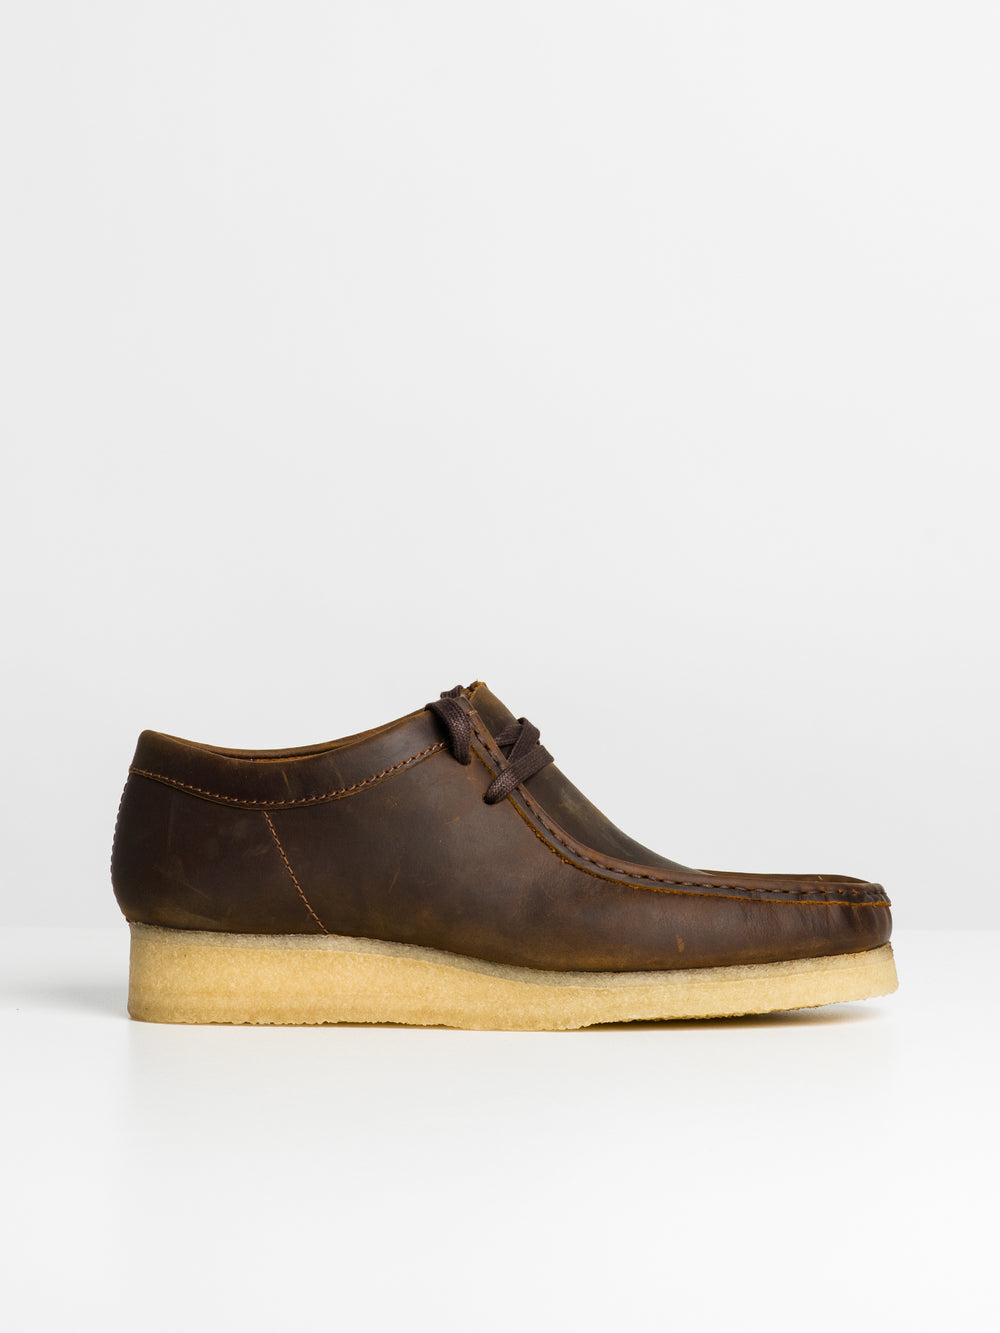 Clarks Wallabee Suede Boots - Brown